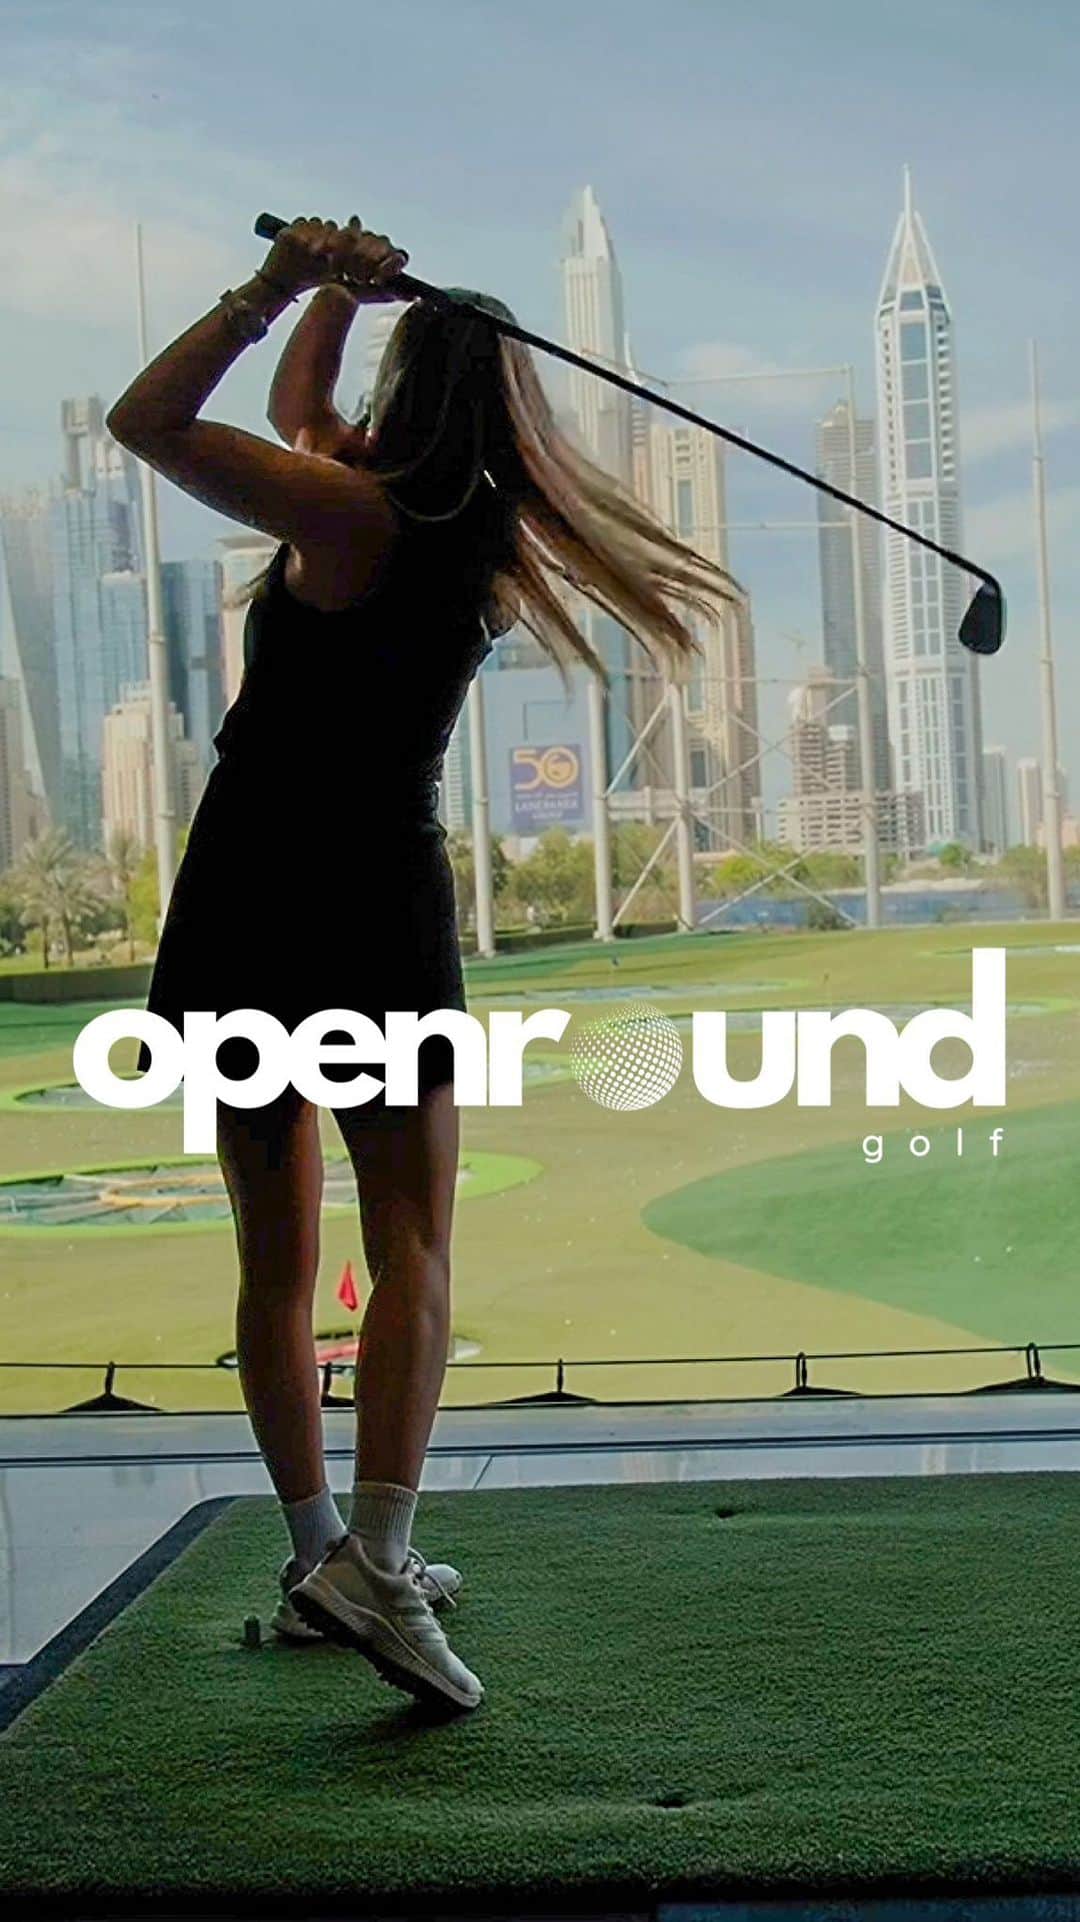 @LONDON | TAG #THISISLONDONのインスタグラム：「⛳️🏌🏽‍♂️ We just launched a new golf community called @OpenRoundGolf! 🥳 @MrLondon @Alice.Sampo & @GolfWithNikki are going to be hosting #OpenRoundGolf events across 🇬🇧 London/UK 🇮🇹 Italy & 🇦🇪 #UAE to inspire more people to consider taking up golf! 🙌🏼 Our community and events are changing perception that golf is a men’s sport, as we gather women and men of all ages and backgrounds together in the same space, to have fun and take their very first swing! 🏌🏽‍♂️ Seasoned golfers are welcome also, as we look to support you in your golf journey. ❤️ Our launch event in 🇦🇪 #Dubai went off with a bang and we’re excited to announce a new London date very soon! 🤩 Sign up for news at OpenRoundGolf.com 💻   Our mission is to foster a global, open community of golfers, regardless of their skill level, where women and men can co-exist in the same space. The events are super fun, and we’re determined to break barriers, especially for the women. We’re a great step for anyone that is curious about golf and our events are a great way to network and make new friends. So why not follow @OpenRoundGolf ?! It’s never too late to start. And golf is incredible for your physical and mental health. 🙏🏼❤️🏌‍♂️ #GolfReimagined  Thanks to our wonderful host @TopGolfDubai who just launched British pub ‘Toad in the Hole’ with a delicious Sunday roast and some fun dart boards - check it out if you’re in the neighbourhood! The skyline is UNREAL! 🤯🤯  Thanks to our partners: @TheLondonPutterCompany for their phenomenal bespoke putters; @prosportinternational, @golfsuperstore1, @footjoyeurope for making us look great on the day 👟; @moyocoevents for the lovely decorations 🎈 and @palmtees.ae for their biodegradable tees. 🌴❤️  For news about future events, subscribe at OpenRoundGolf.com  To partner with us contact@openroundgolf.com   Powered by the @LONDON Platforms」